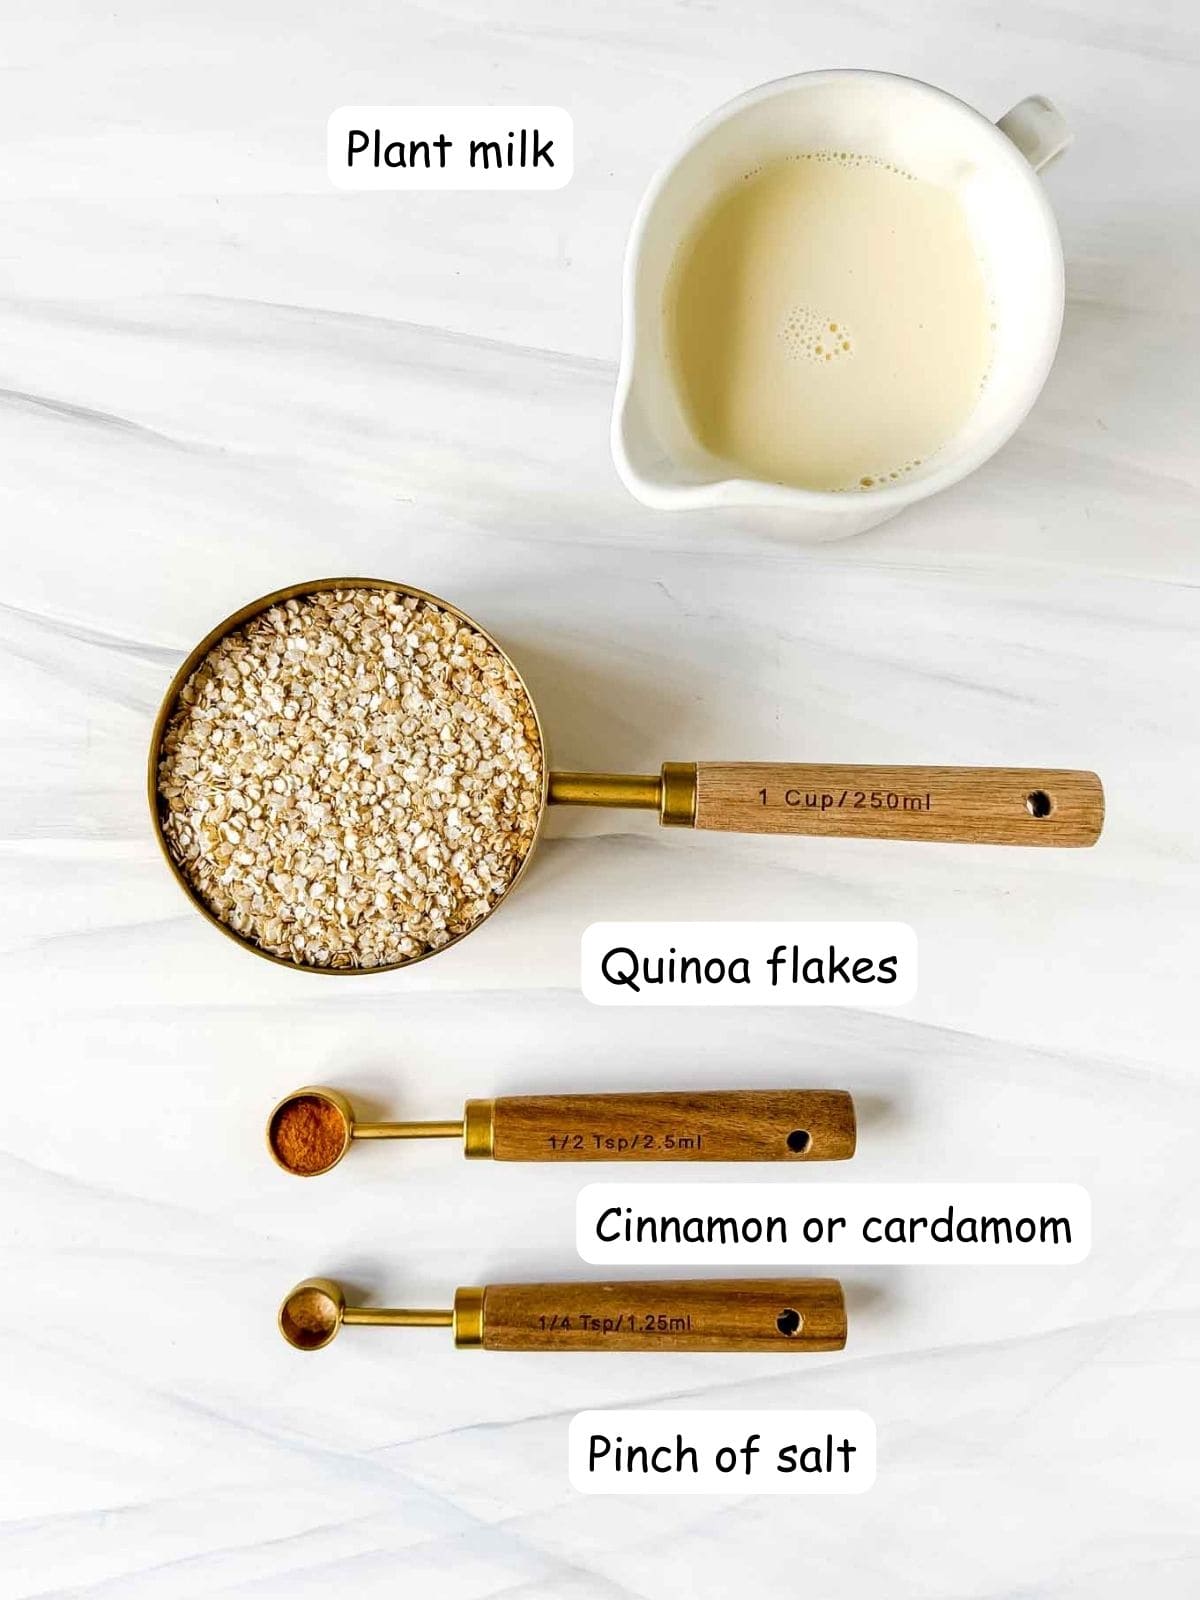 individually labelled ingredients to make quinoa flake porridge including a jug of plant milk and spoonful of cinnamon.